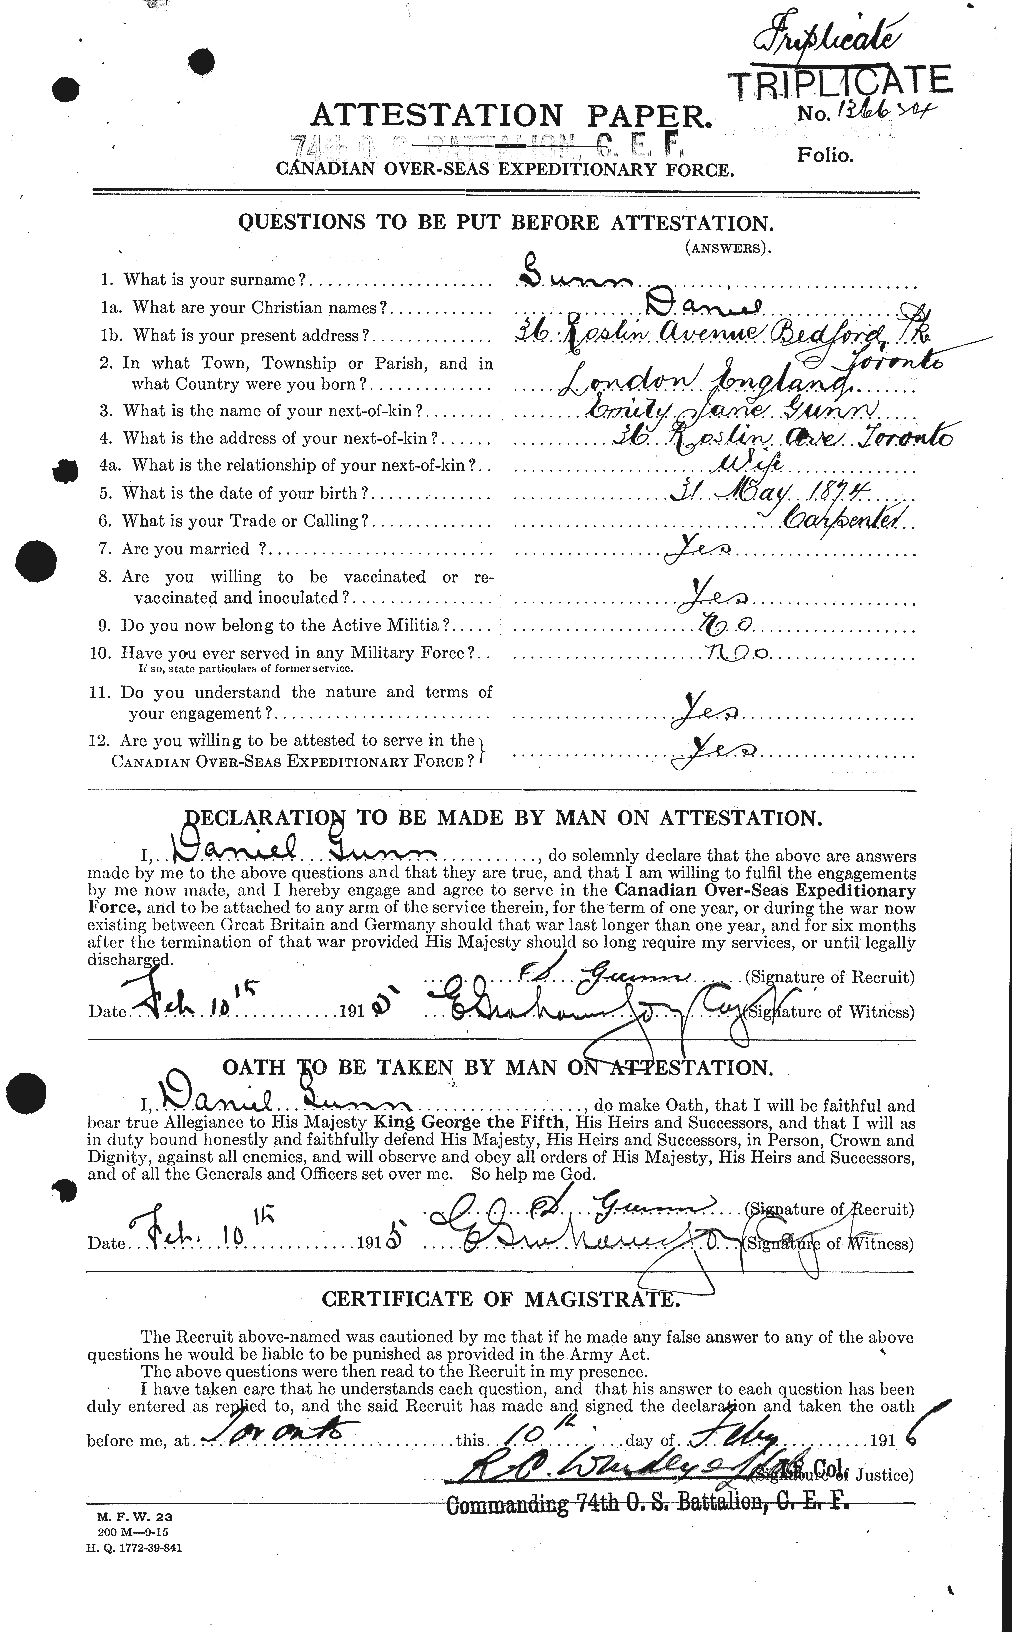 Personnel Records of the First World War - CEF 368018a